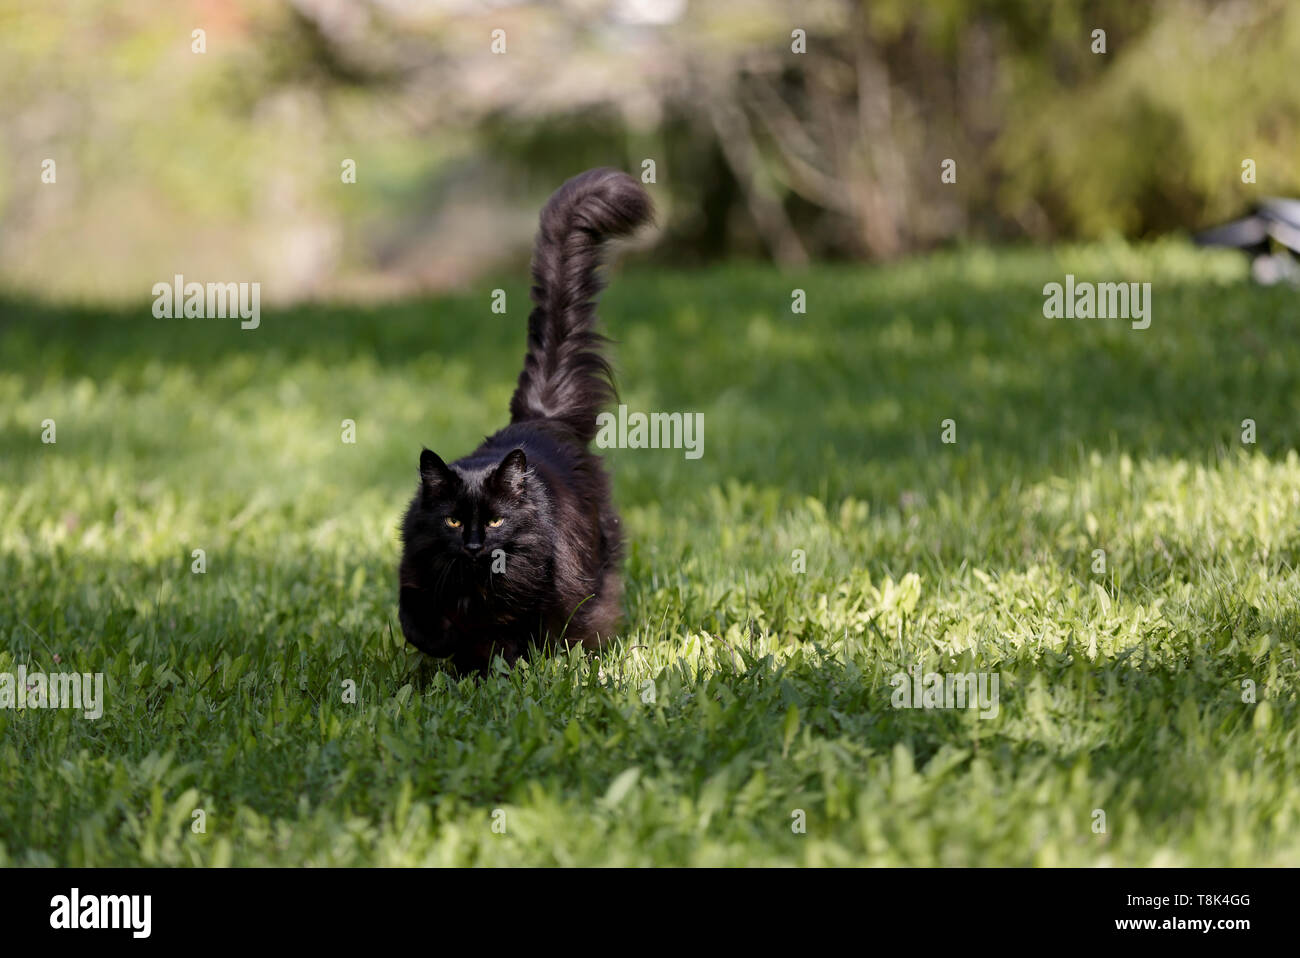 Black norwegian forest cat approaching with her tail lifted Stock Photo